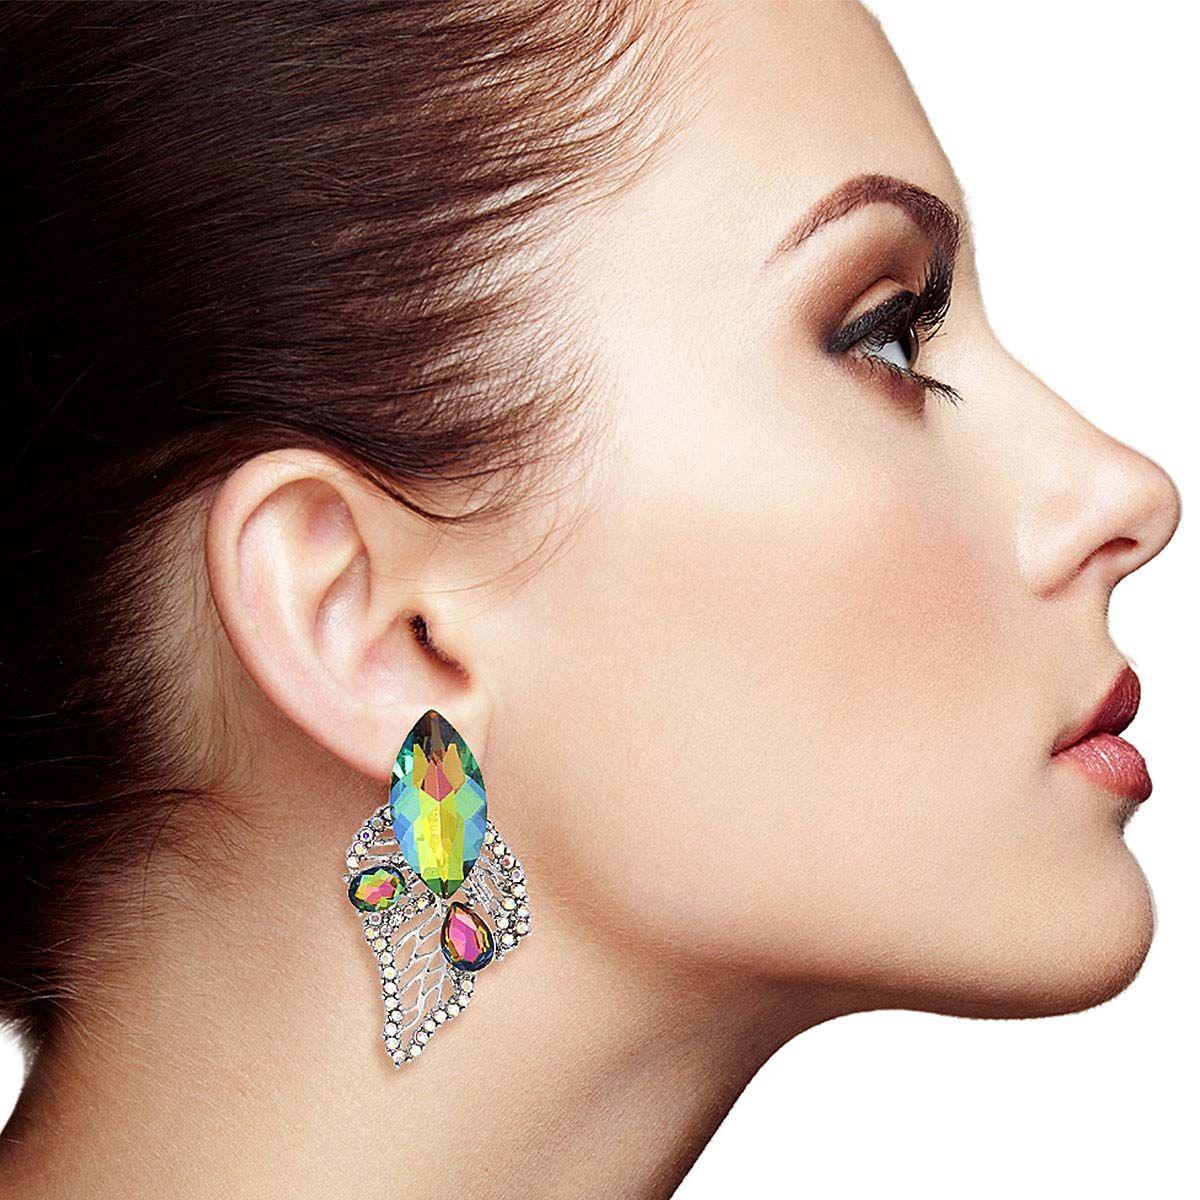 Shop Now: Trendy Pink and Green Silver Leaf Stud Earrings